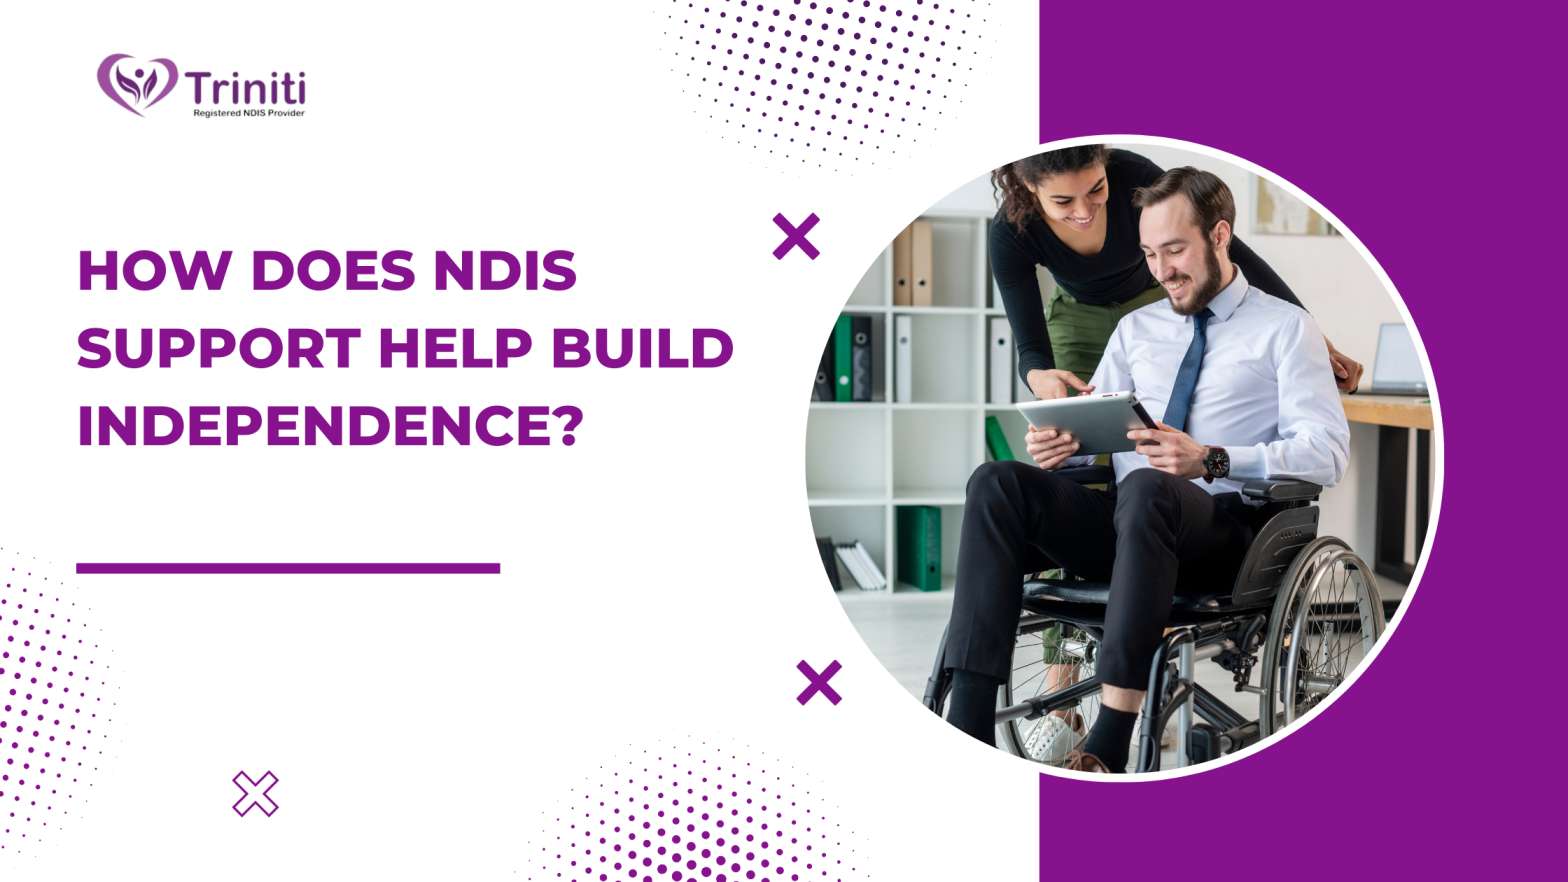 How does NDIS support help build independence?